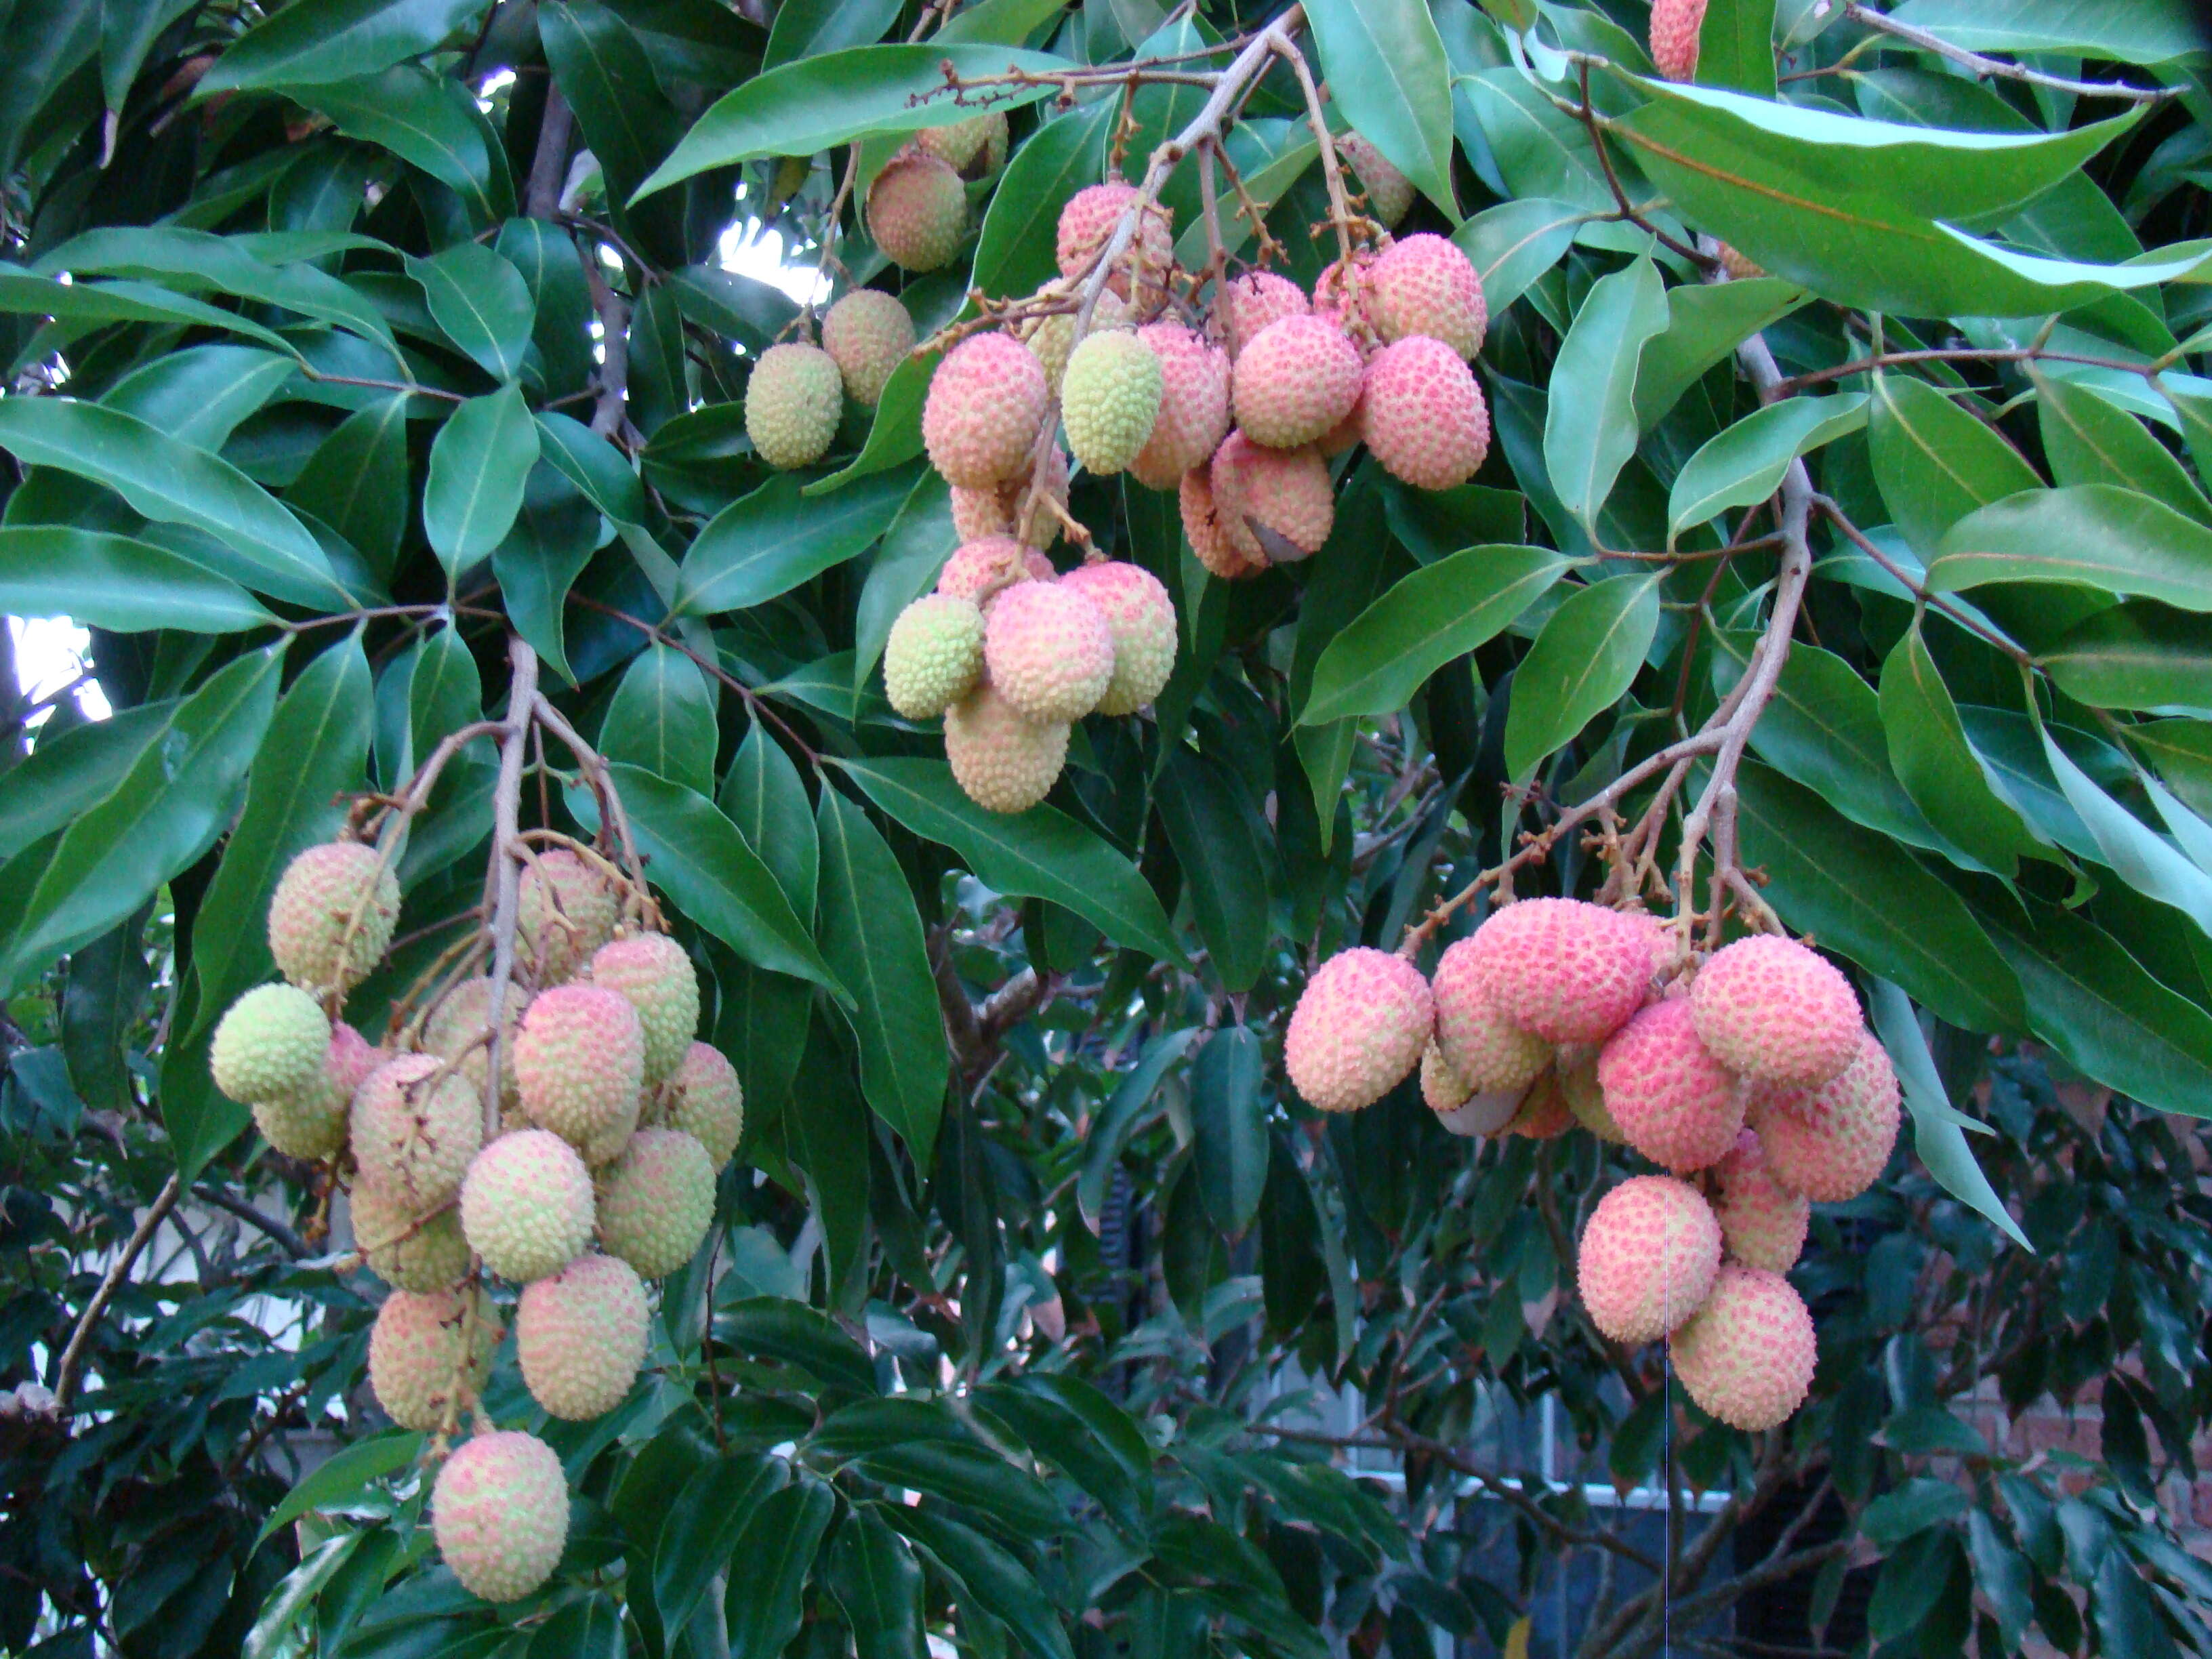 Image of lychee